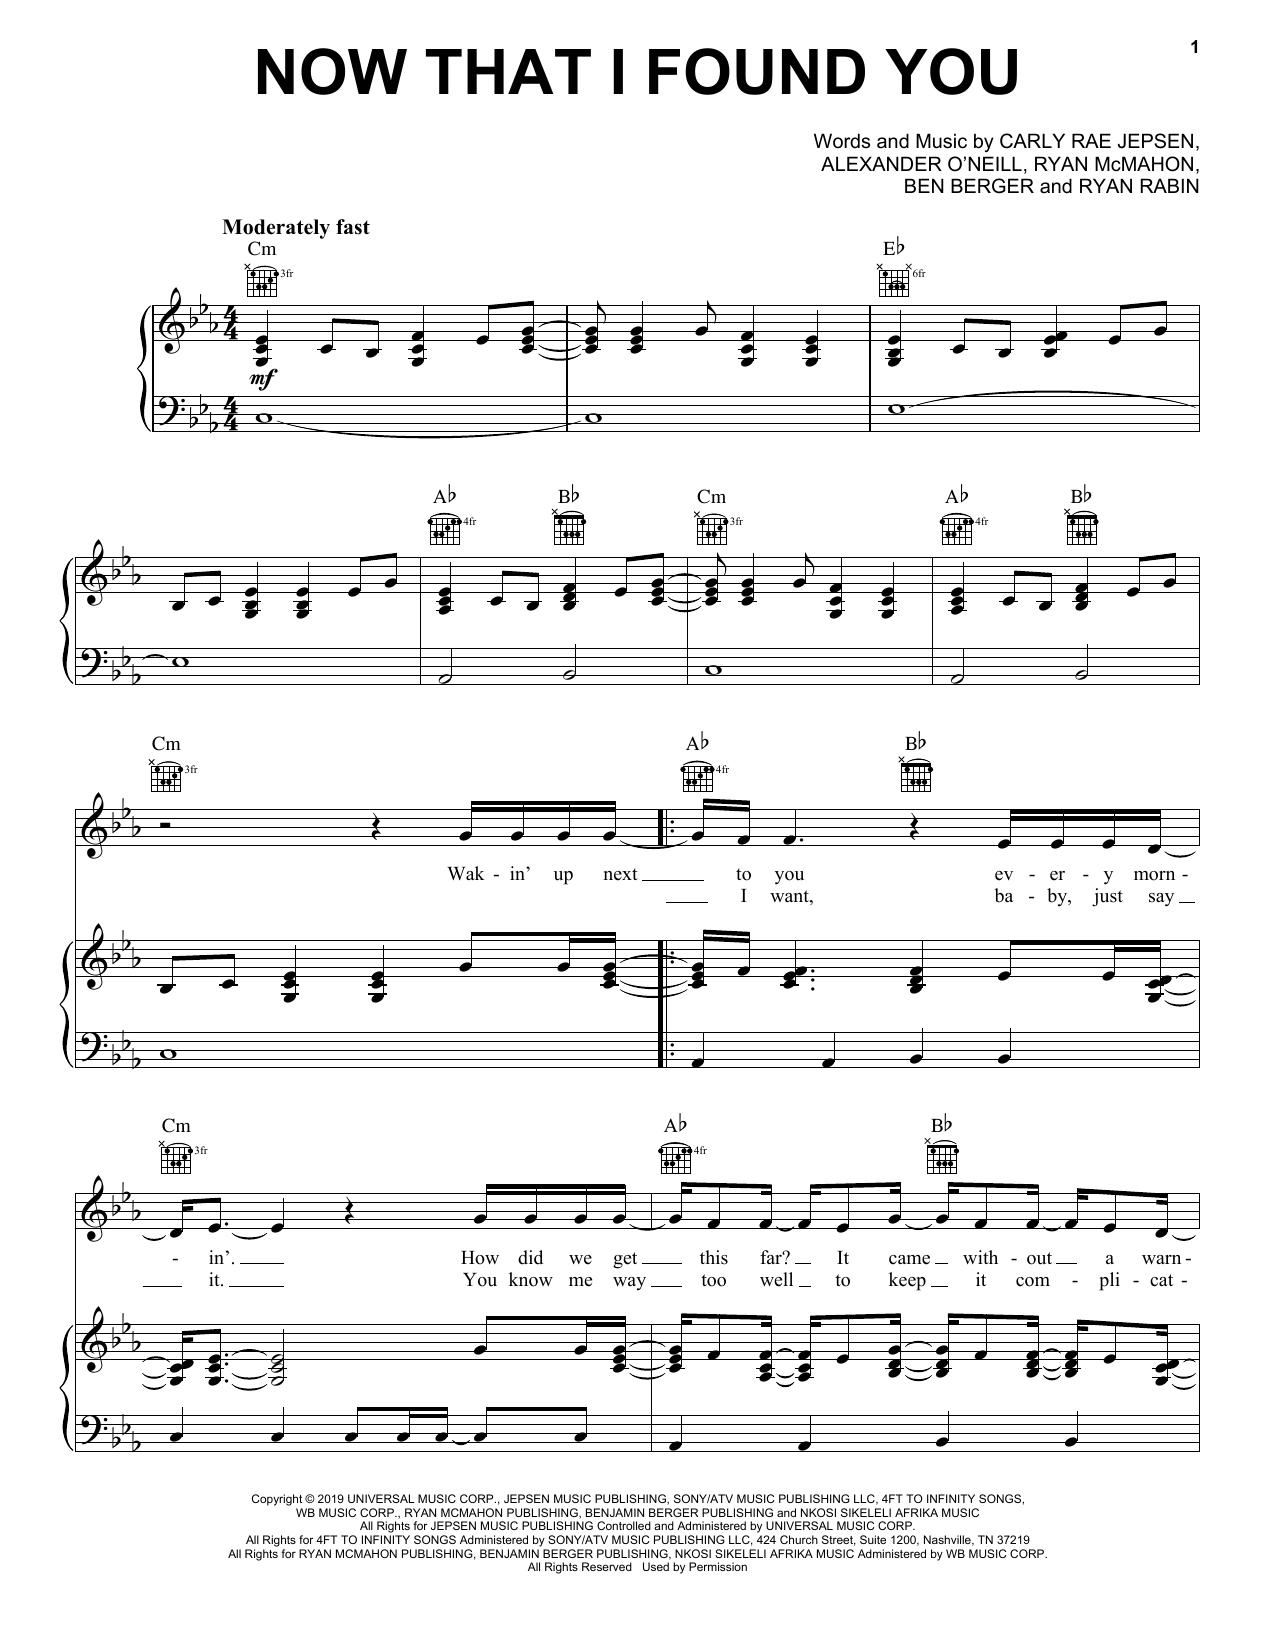 Download Carly Rae Jepsen Now That I Found You Sheet Music